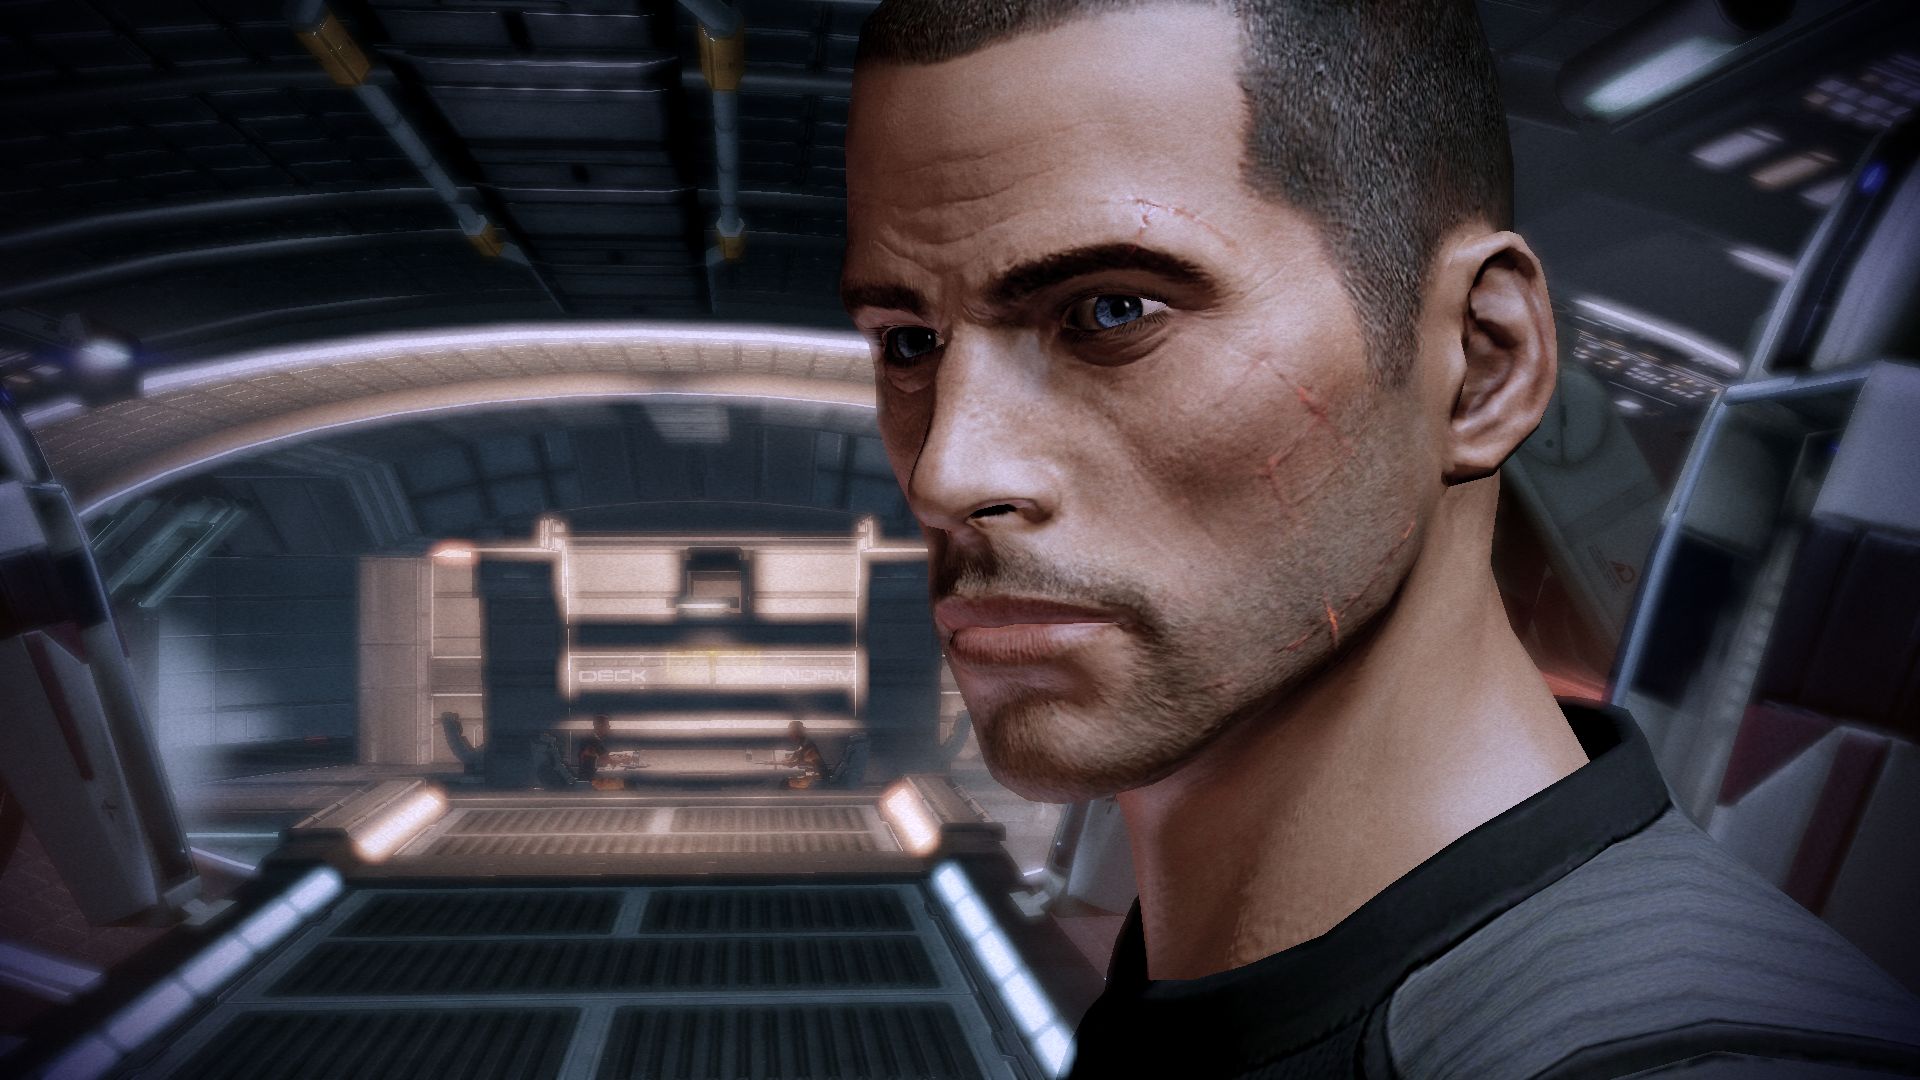  BroShep's voice actor played so many weird alien side characters in Mass Effect he doesn't mind if people prefer FemShep: 'I'm afraid you'll be forced to encounter me as Niftu Cal and Blasto and any vorcha you run into' 